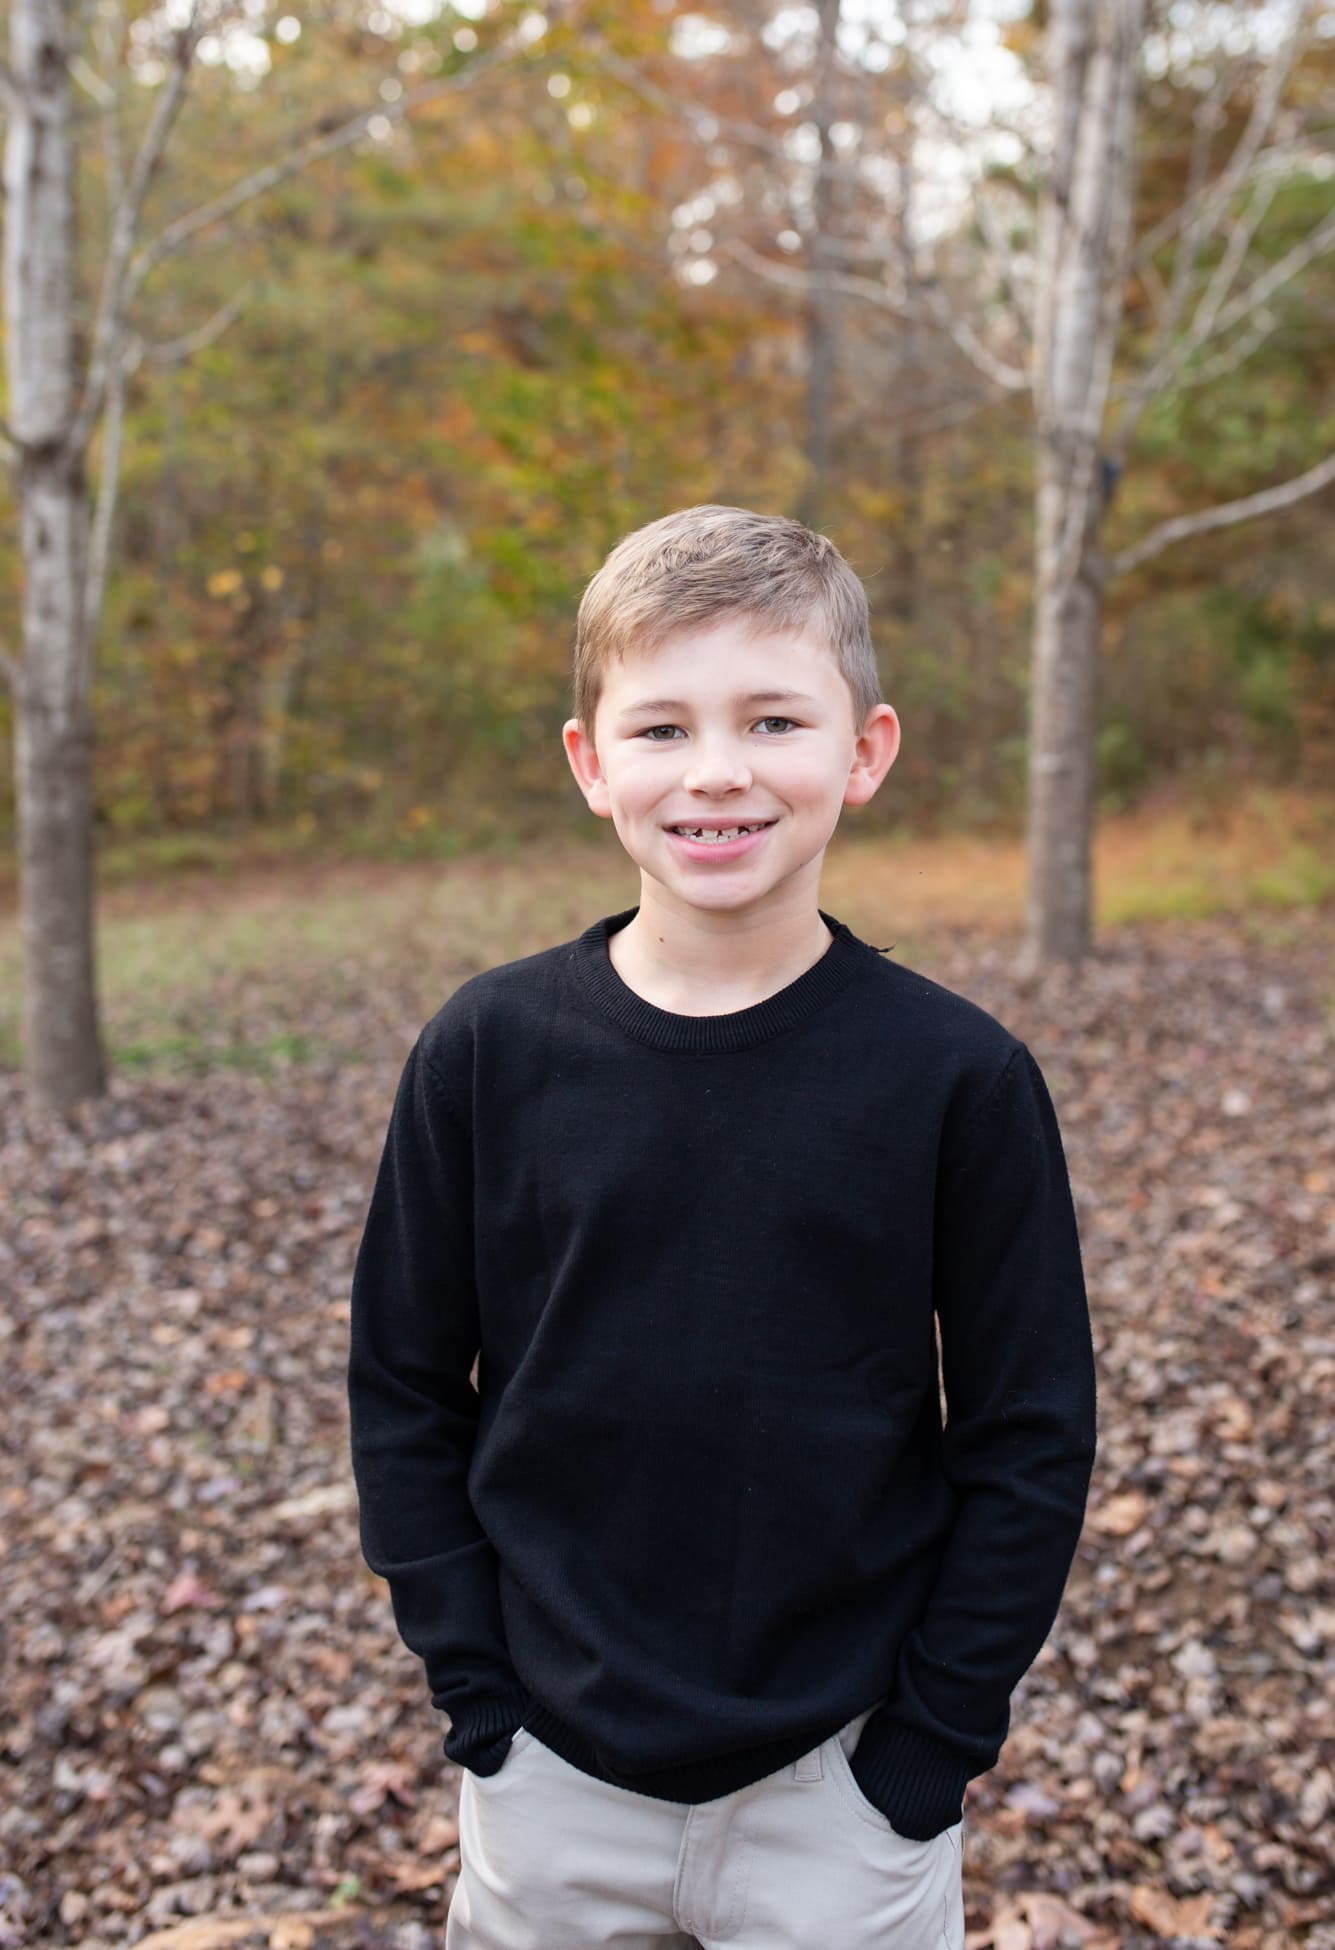 a boy wearing black sweater smiling for the camera